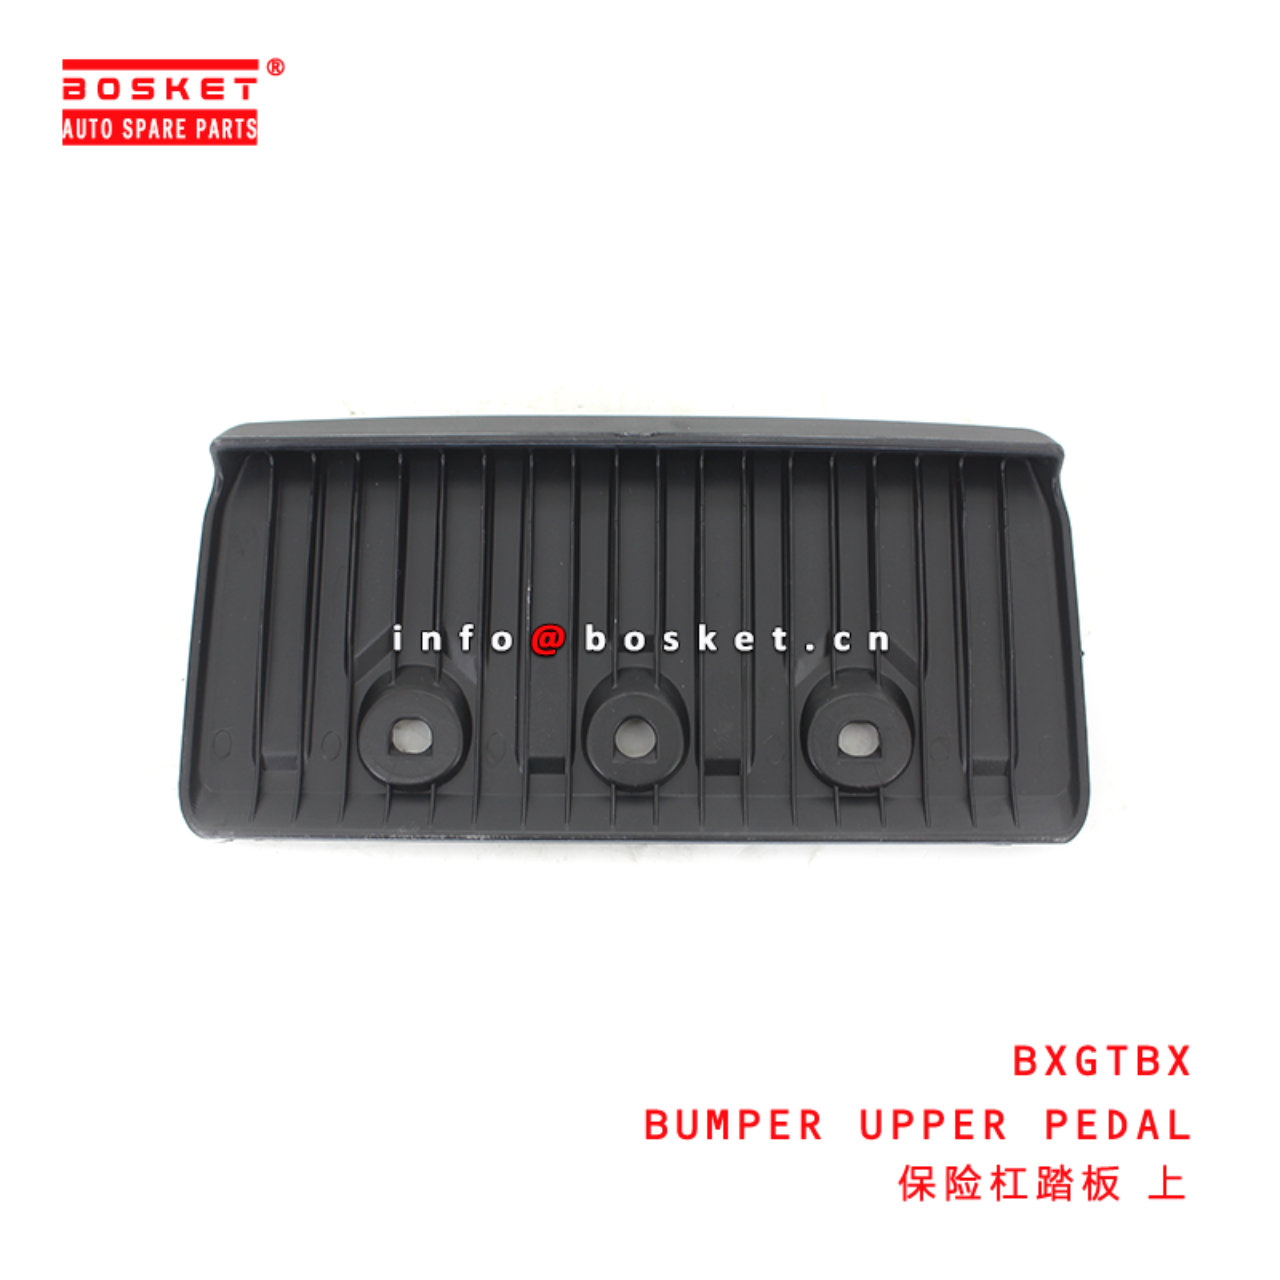 BXGTBX Bumper Lower Pedal Suitable for ISUZU HINO500